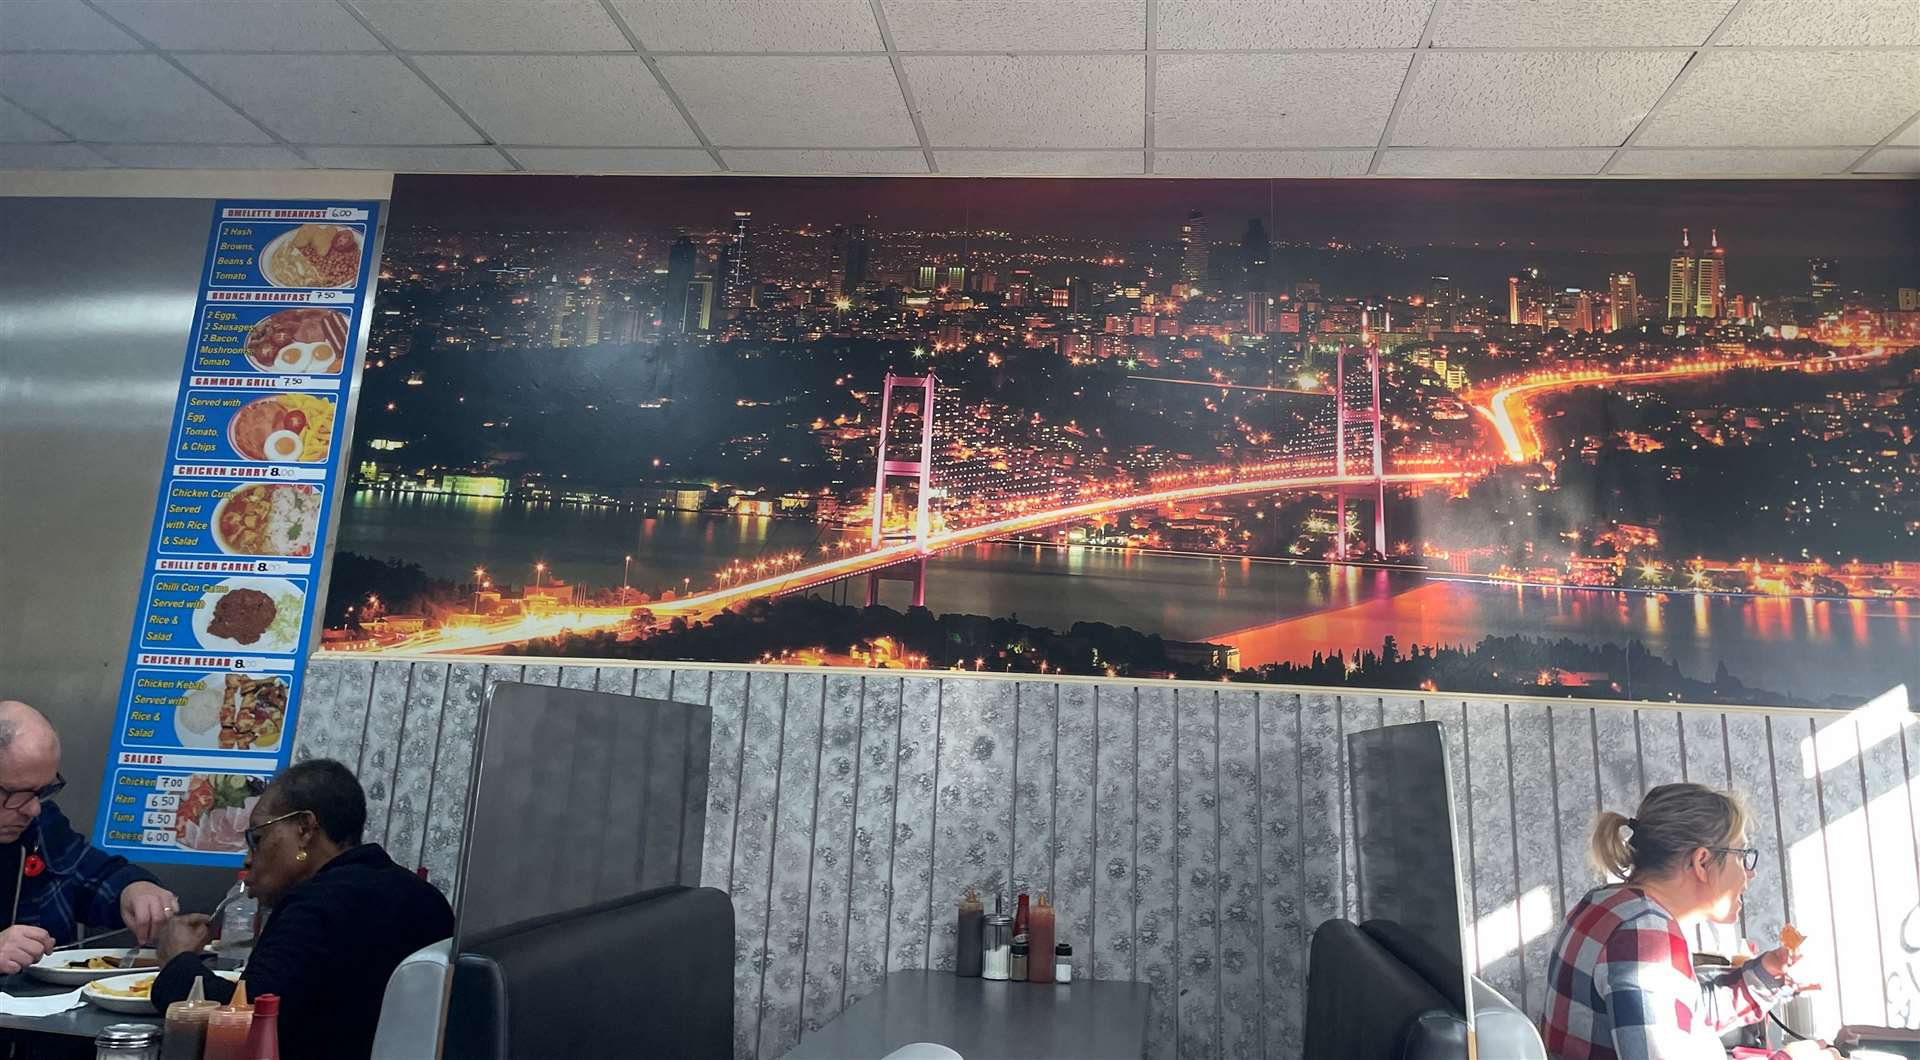 There were multiple canvases of cities around the cafe